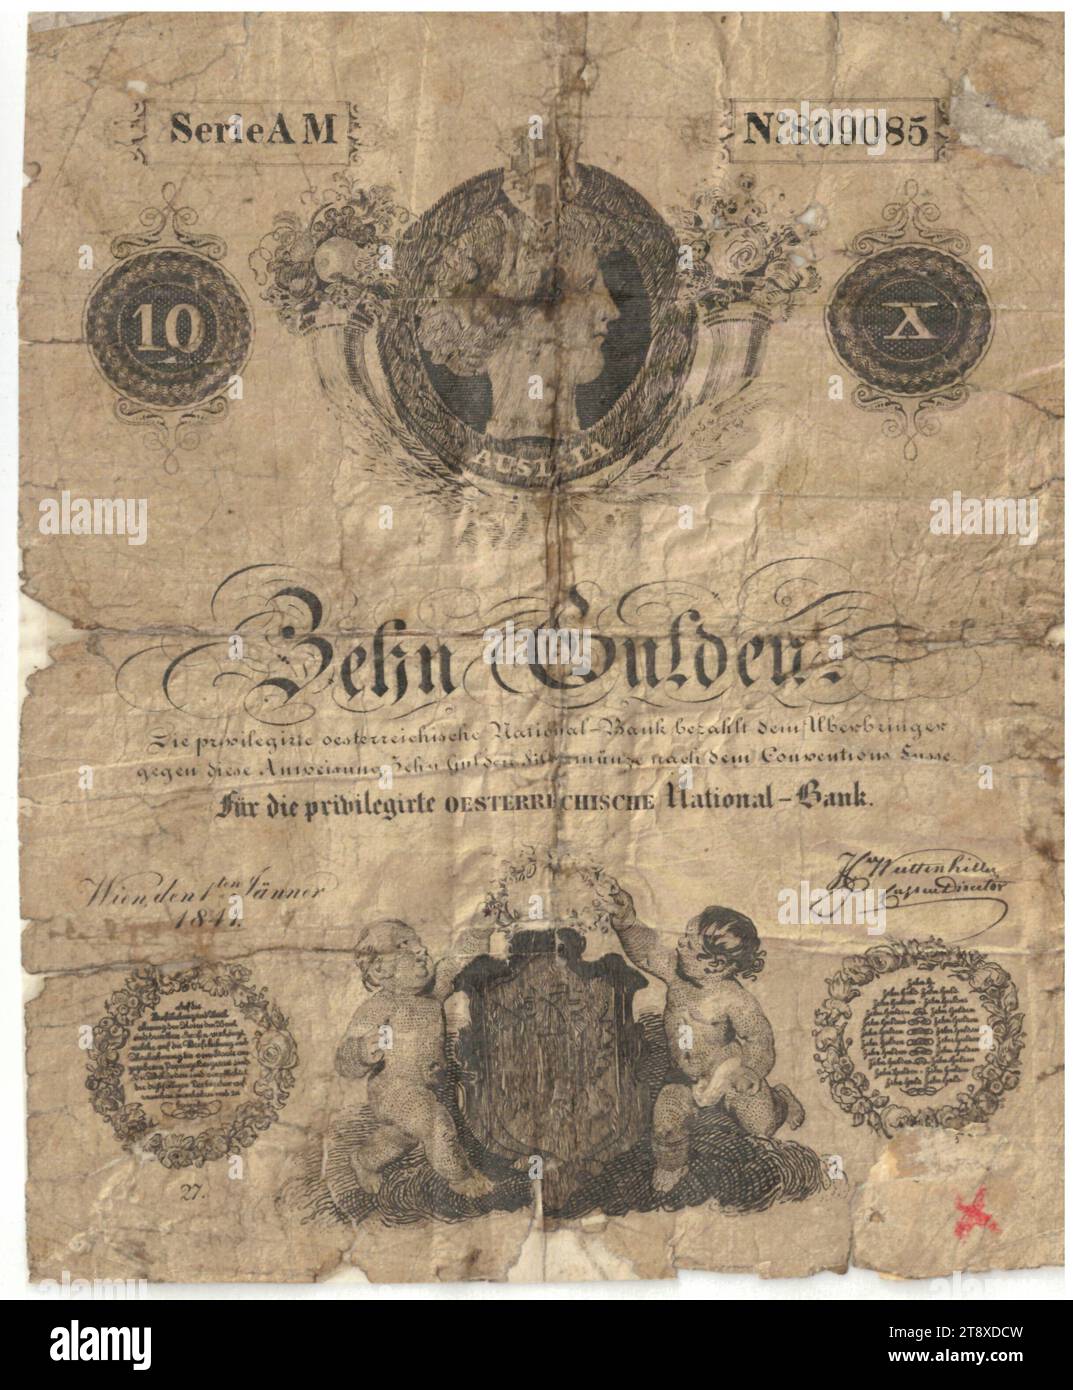 Instruction (counterfeit), 10 Gulden, Privilegierte Österreichische National-Bank, mint authority, Date after 01.01.1841, paper, printing, width 102 mm, height 124 mm, Mint, Vienna, Mint territory, Austria, 2nd Republic (since 1945), Finance, counterfeit, forgery, woman, child, coat of arms (as symbol of the state, etc.), bank-note, money, The Vienna Collection Stock Photo